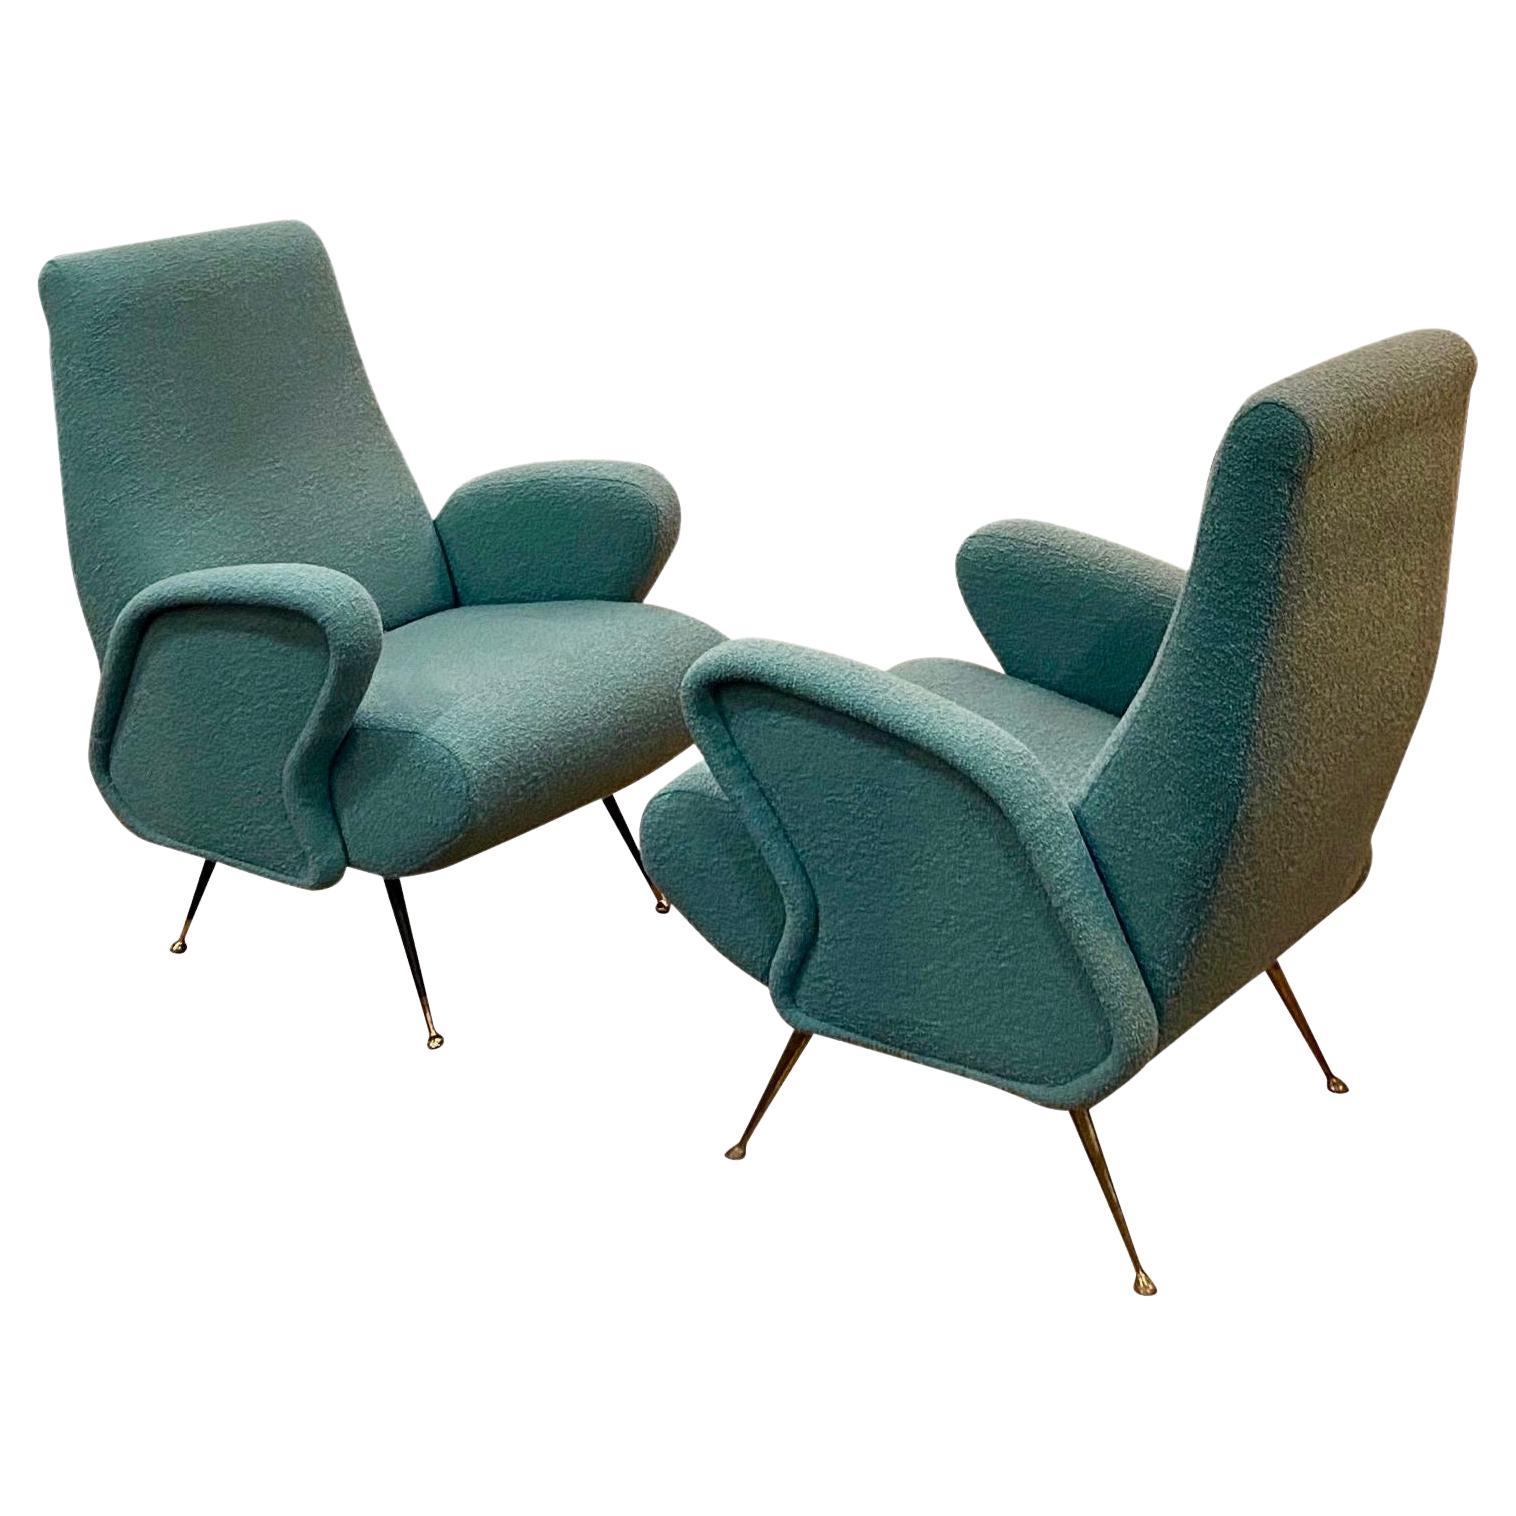 2 x Sculptural 1950's Italian Blue Armchairs or Lounge Chairs